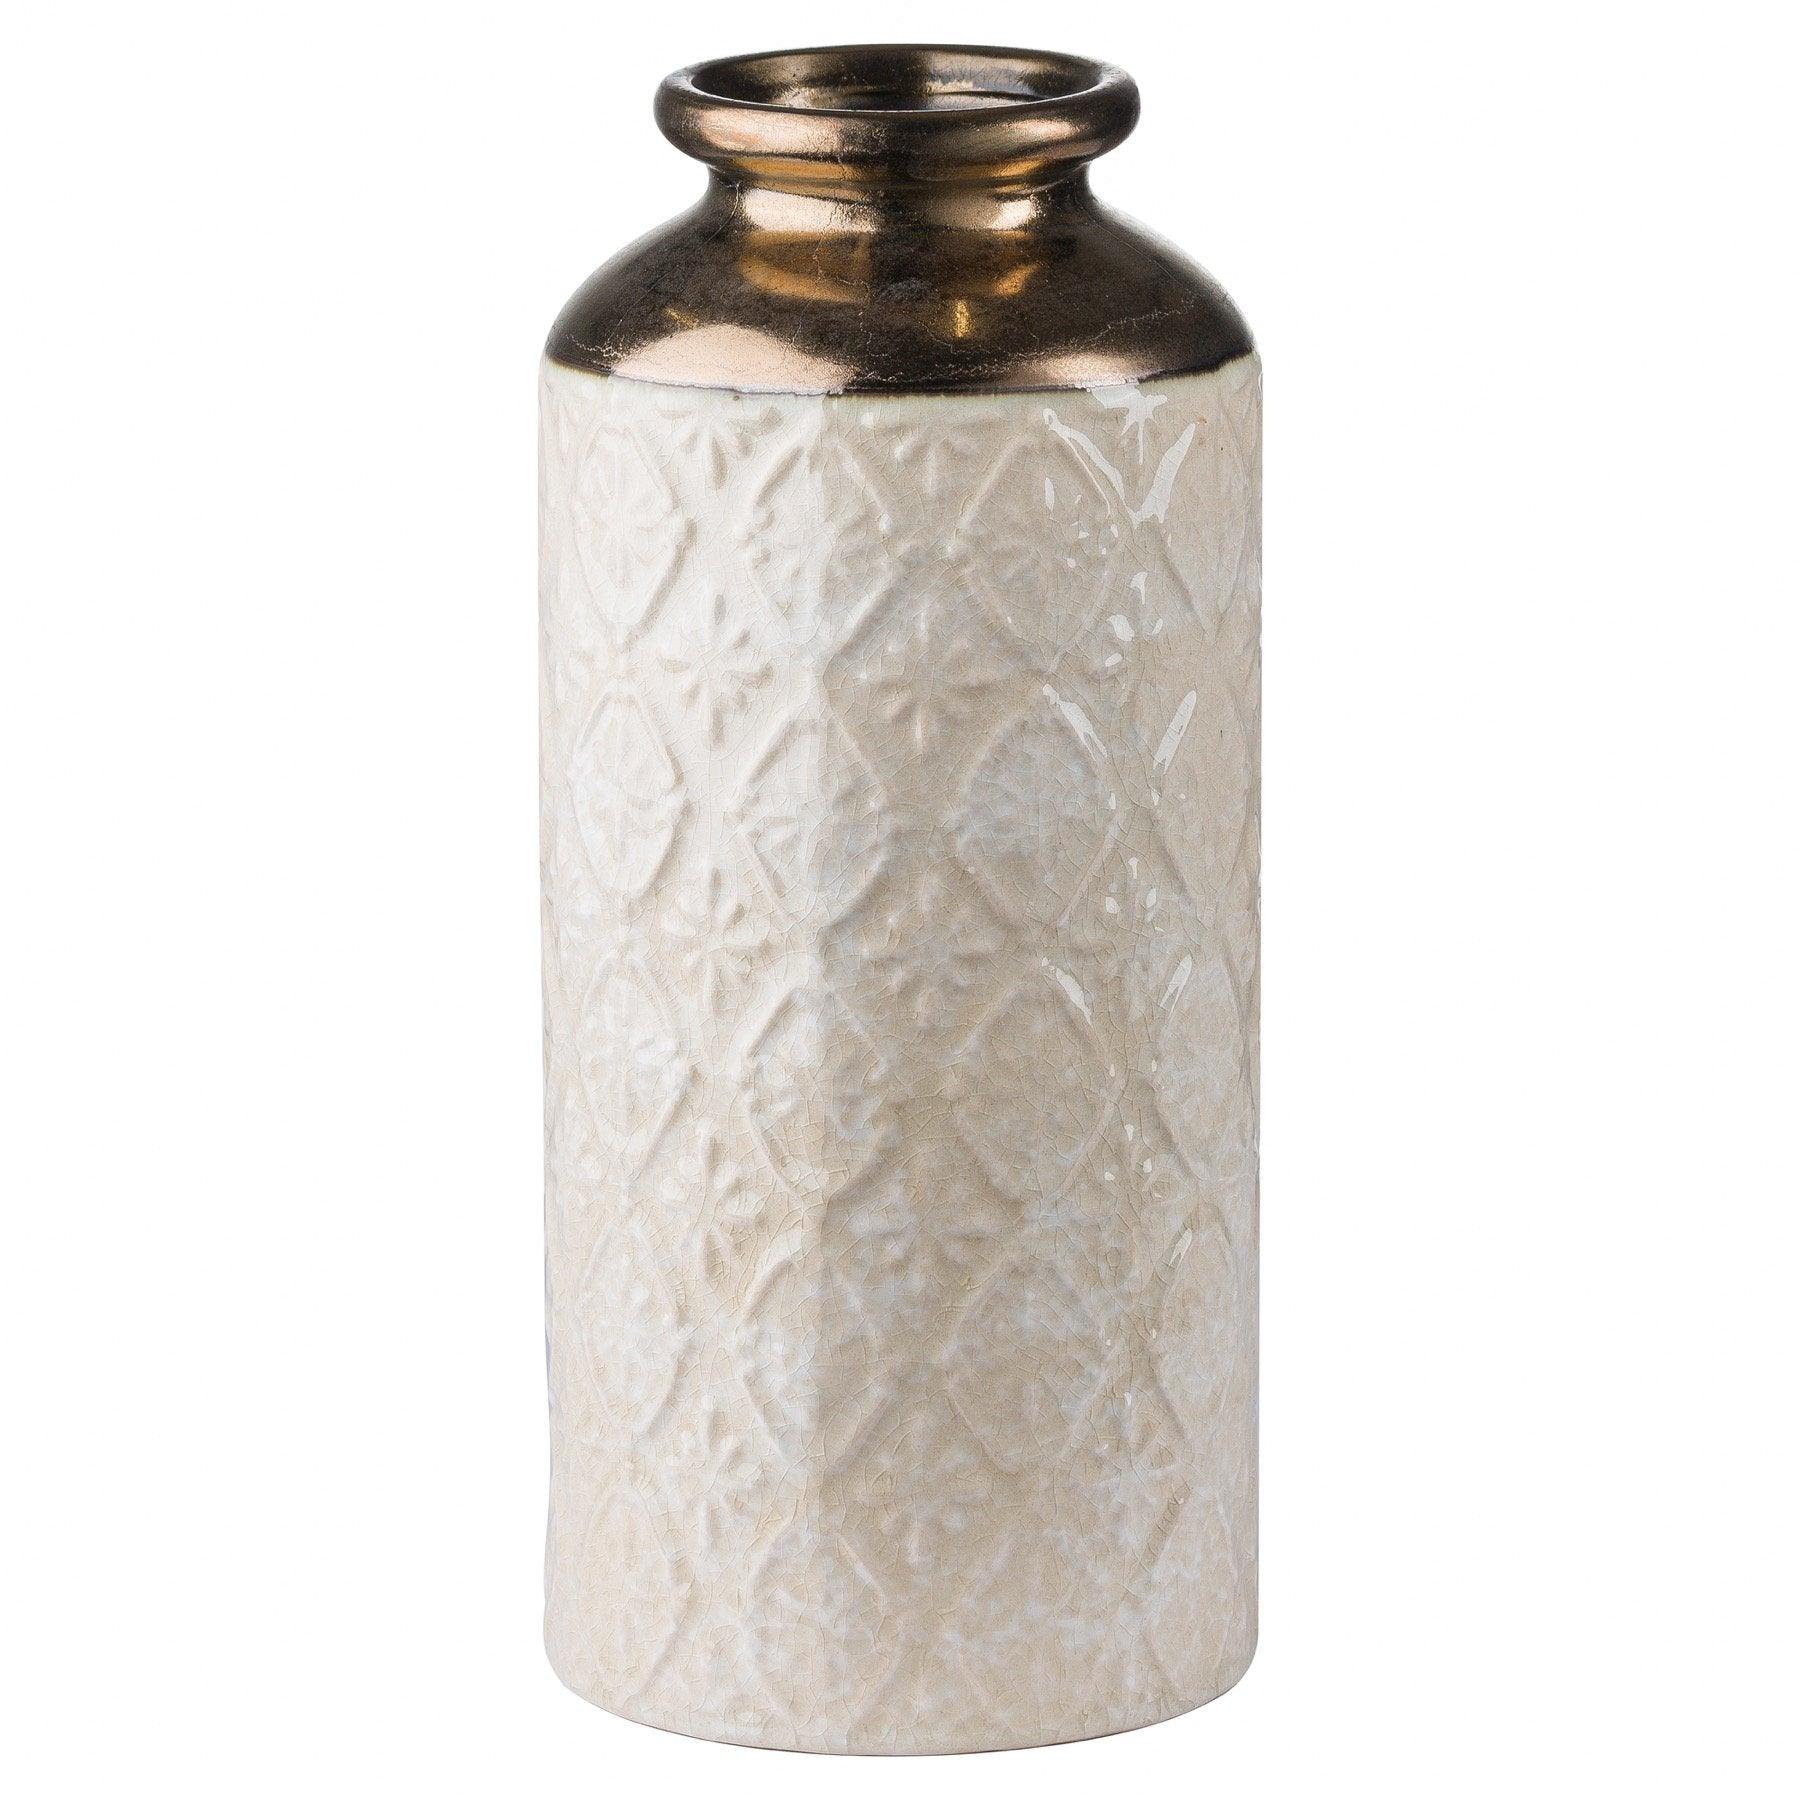 Seville Collection Olpe Vase - Vookoo Lifestyle